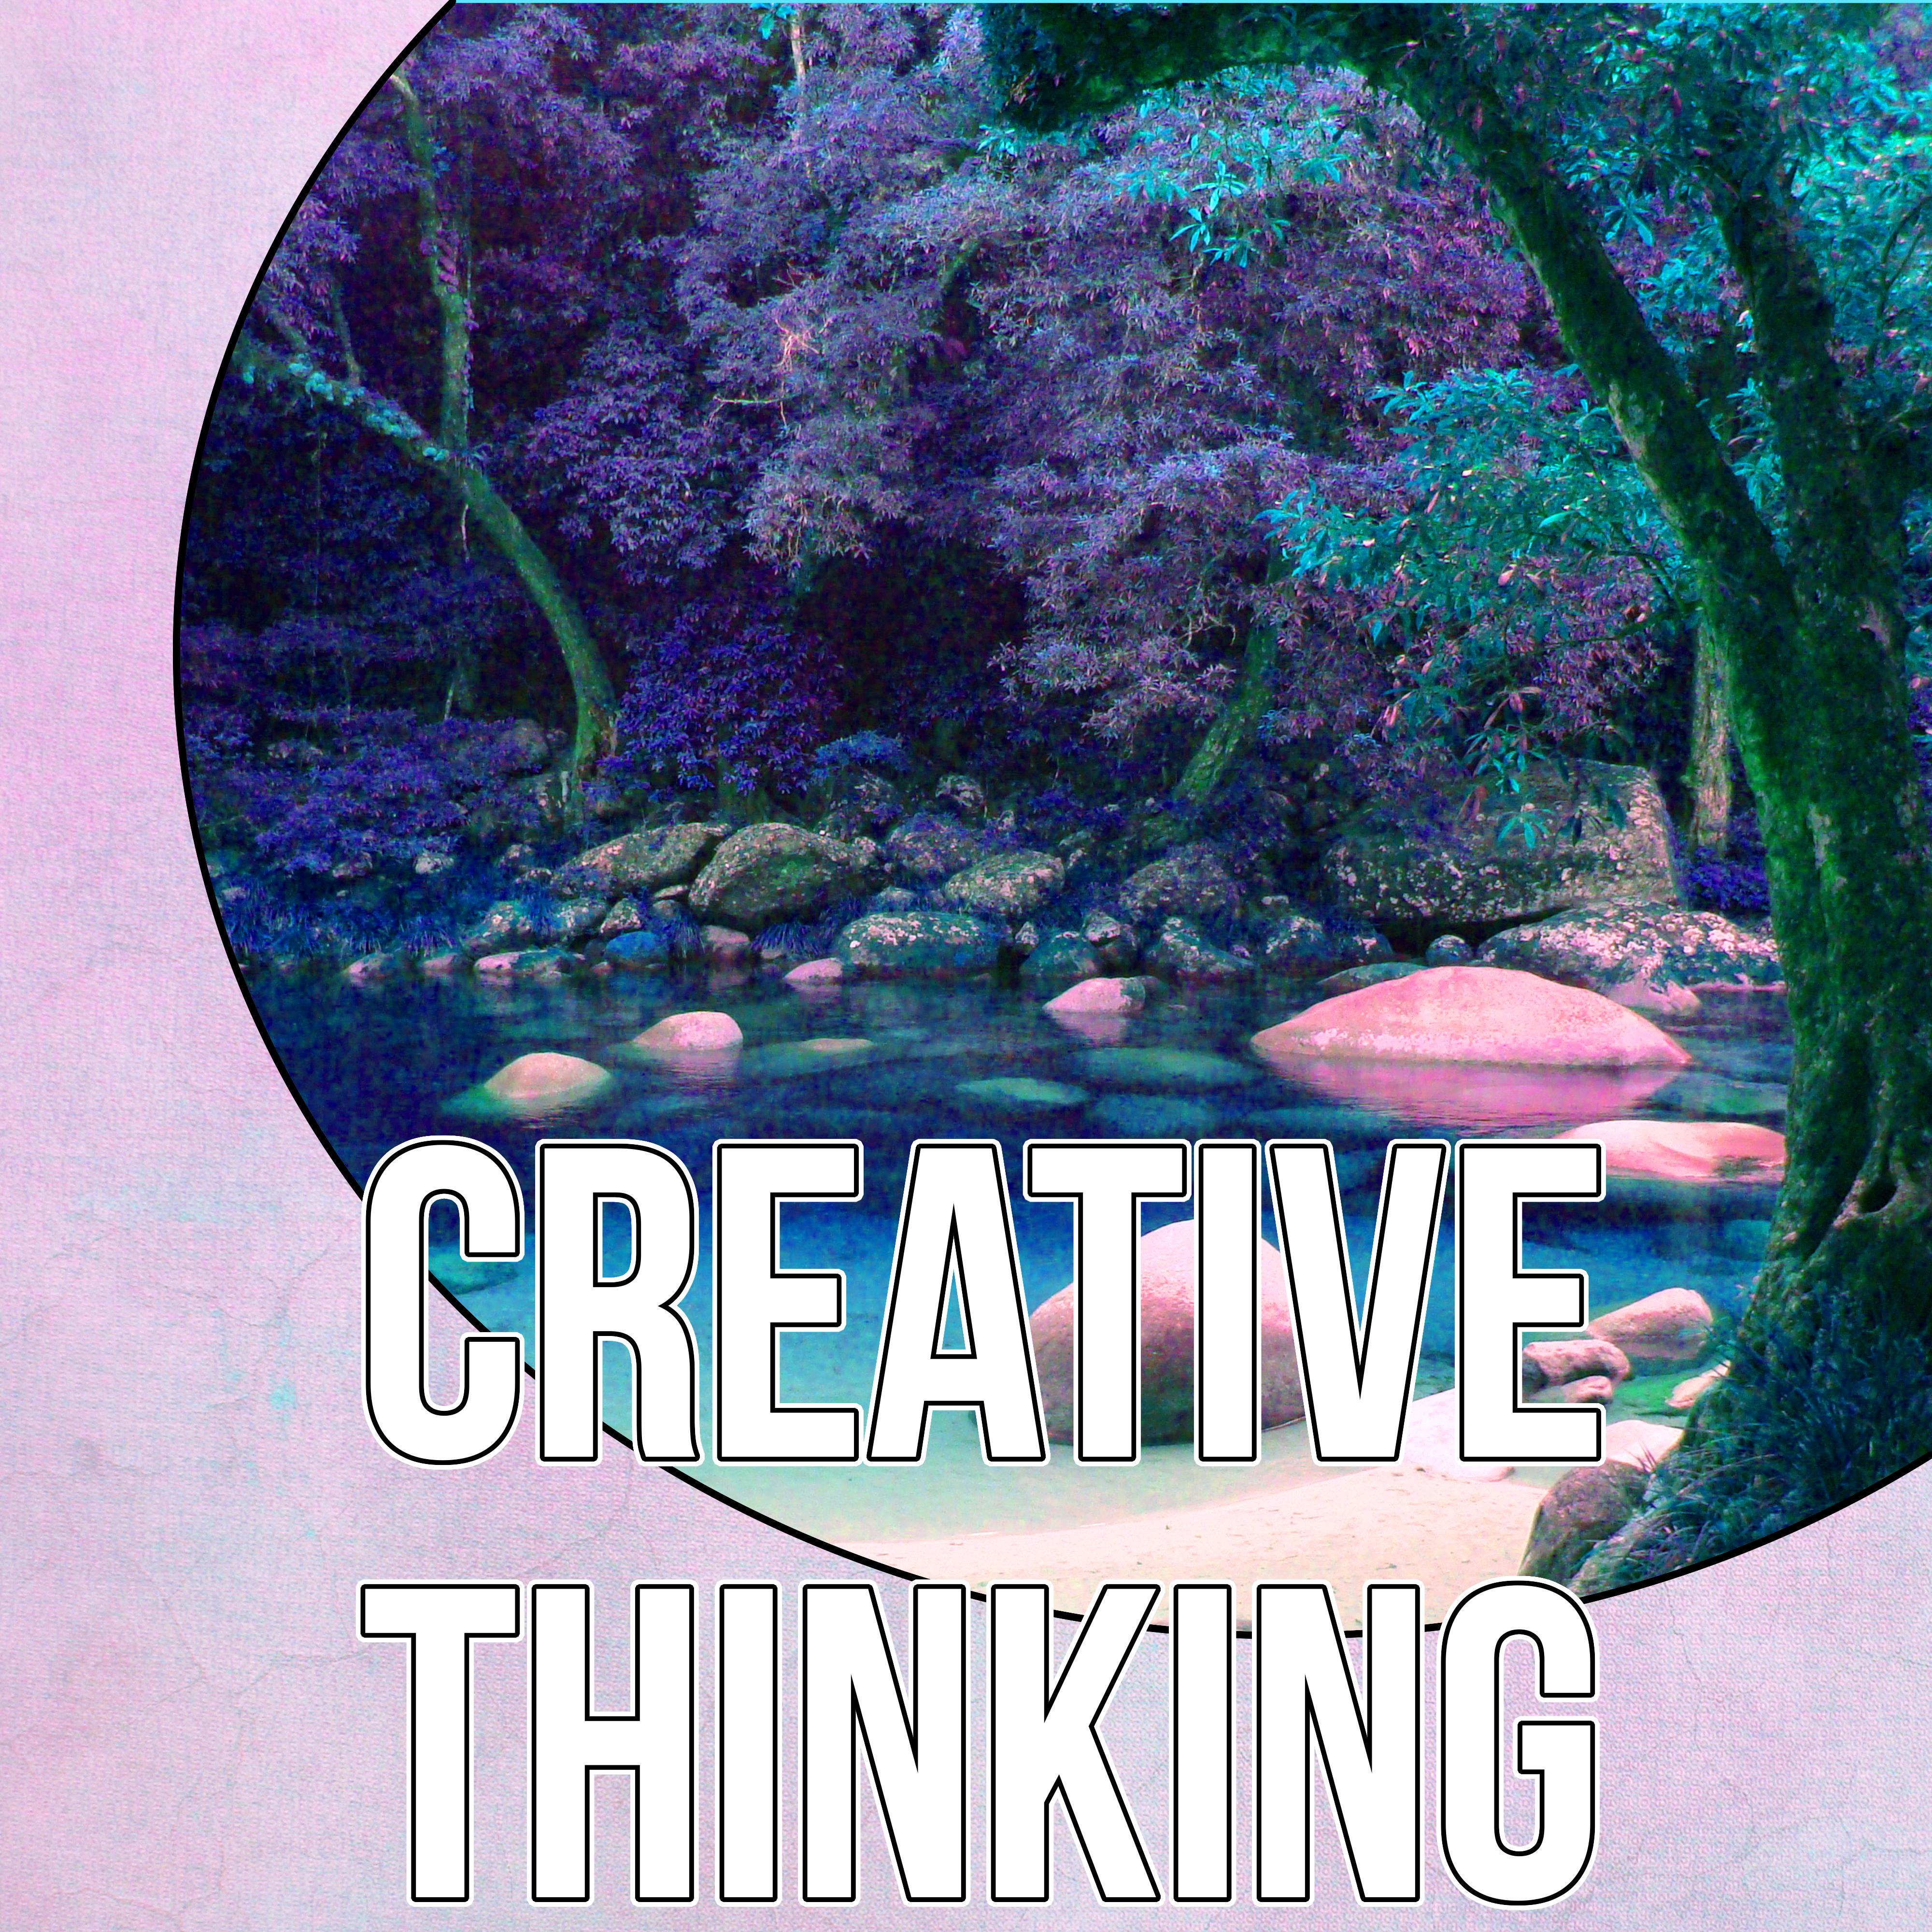 Creative Thinking - Meditation Songs & Relaxing Music for Yoga Meditation and Spiritual Healing